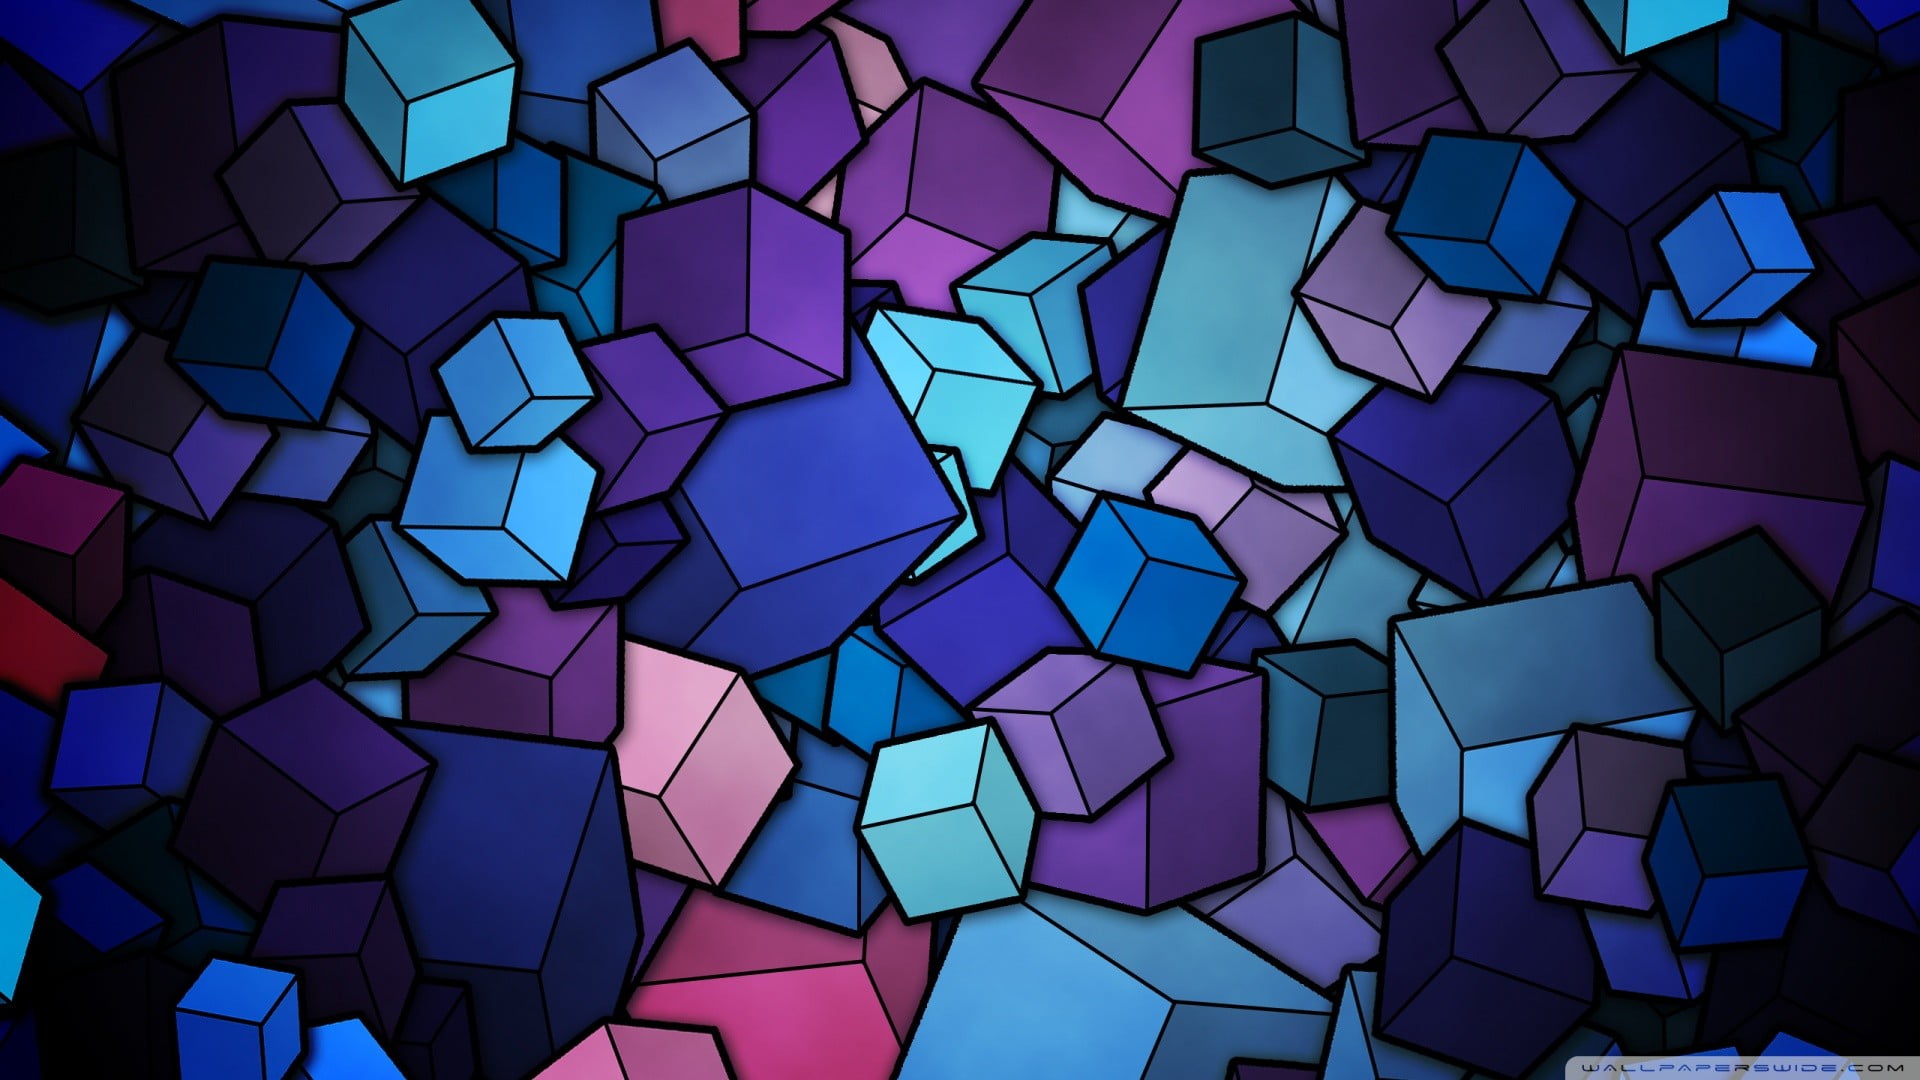 blue, purple, and pink box graphic, abstract